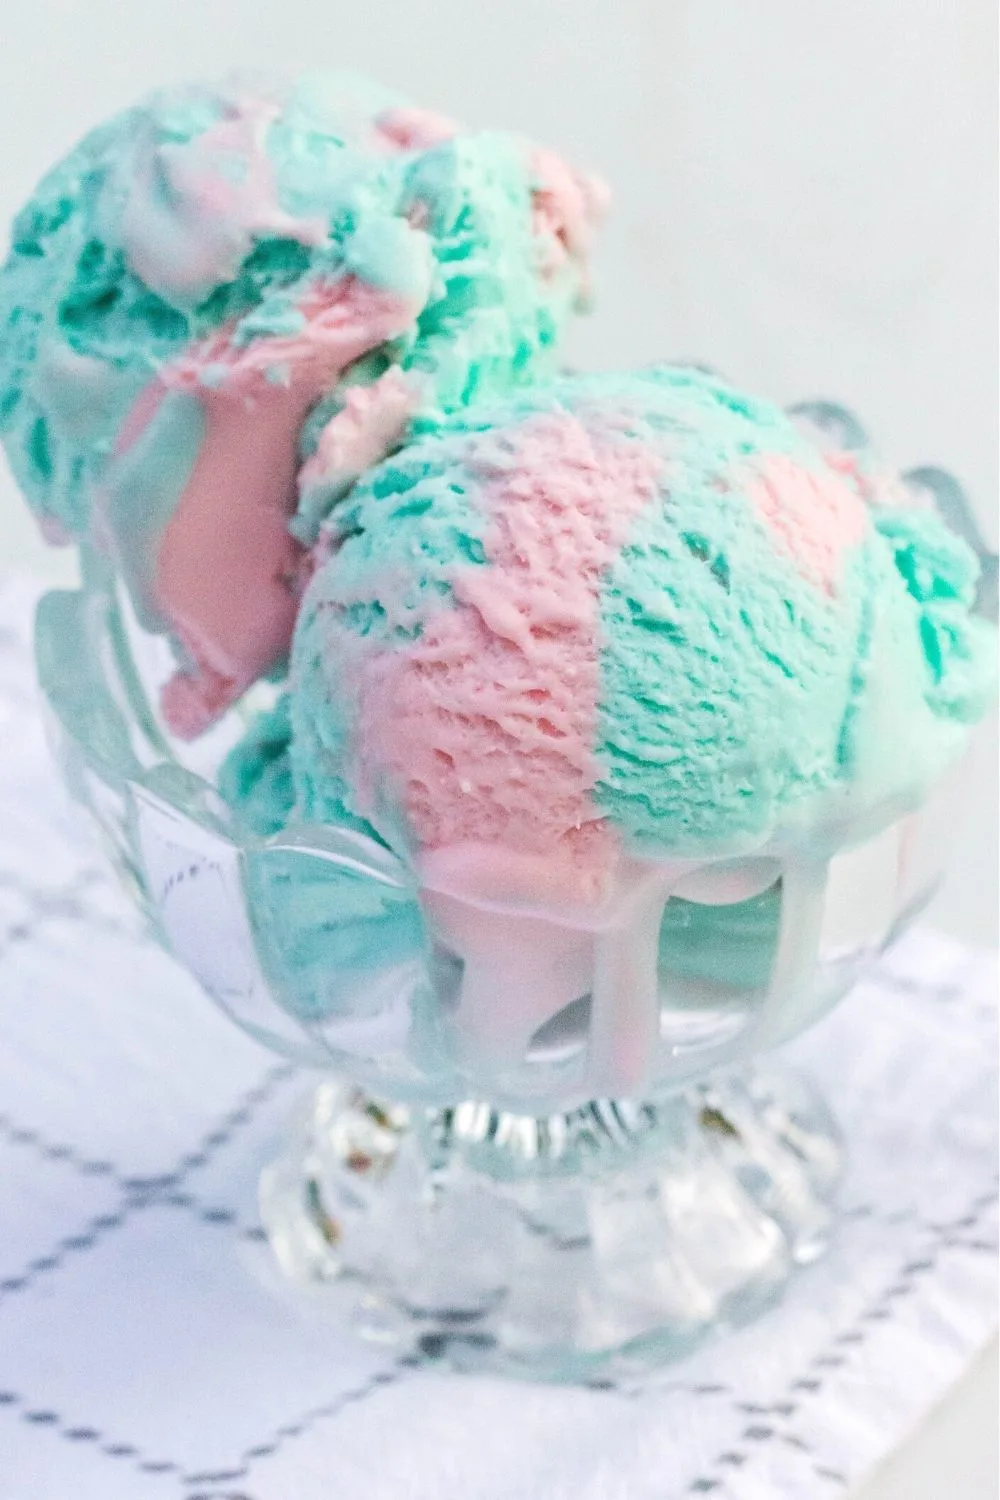 two scoops of no-churn cotton candy ice cream served in a glass dish